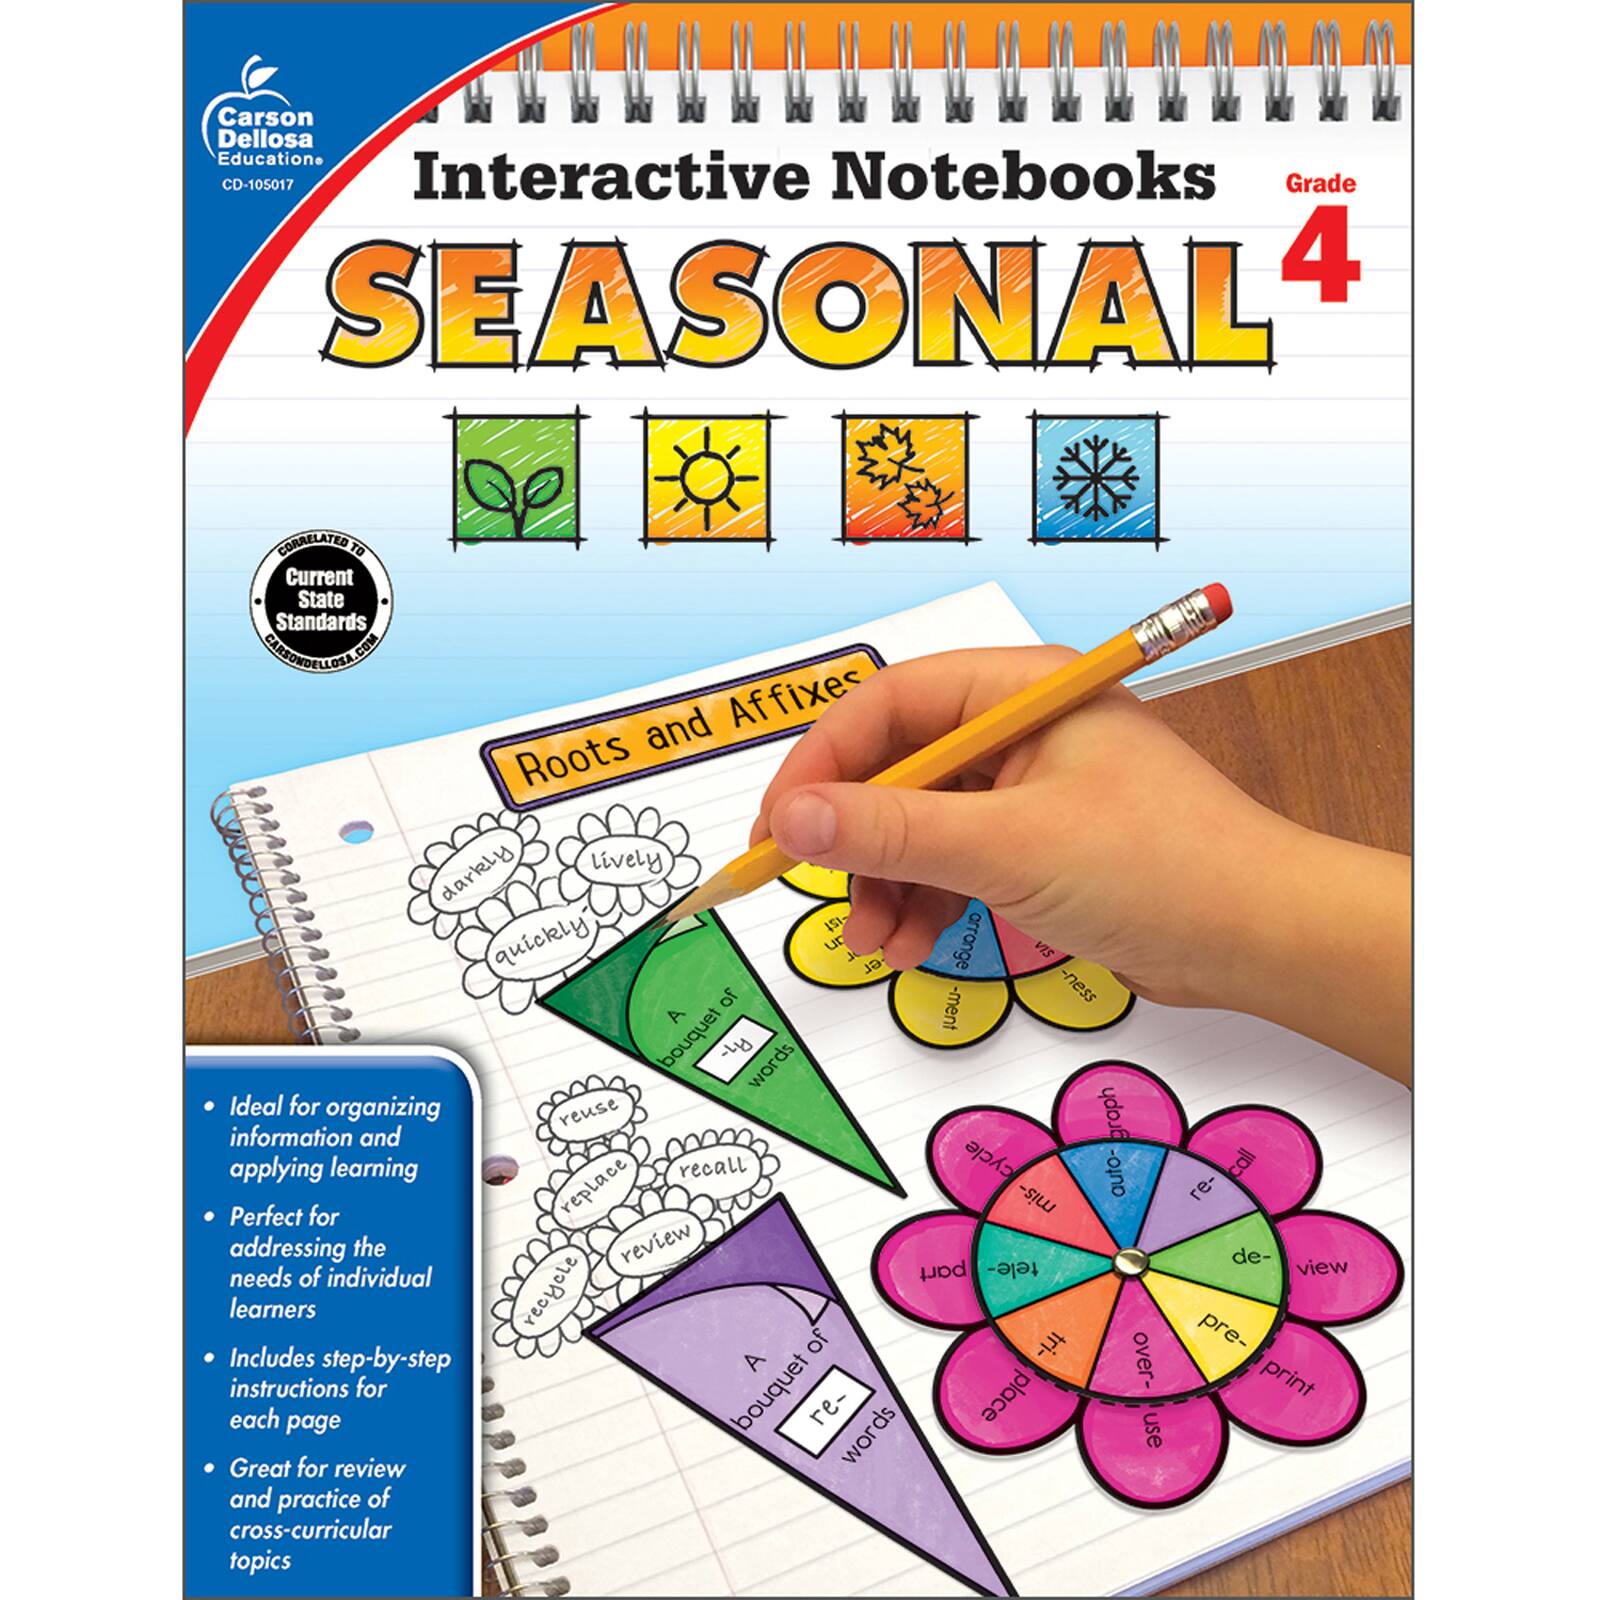 Purchase the Interactive Notebooks: Seasonal Resource Book, Grade 4 at Michaels